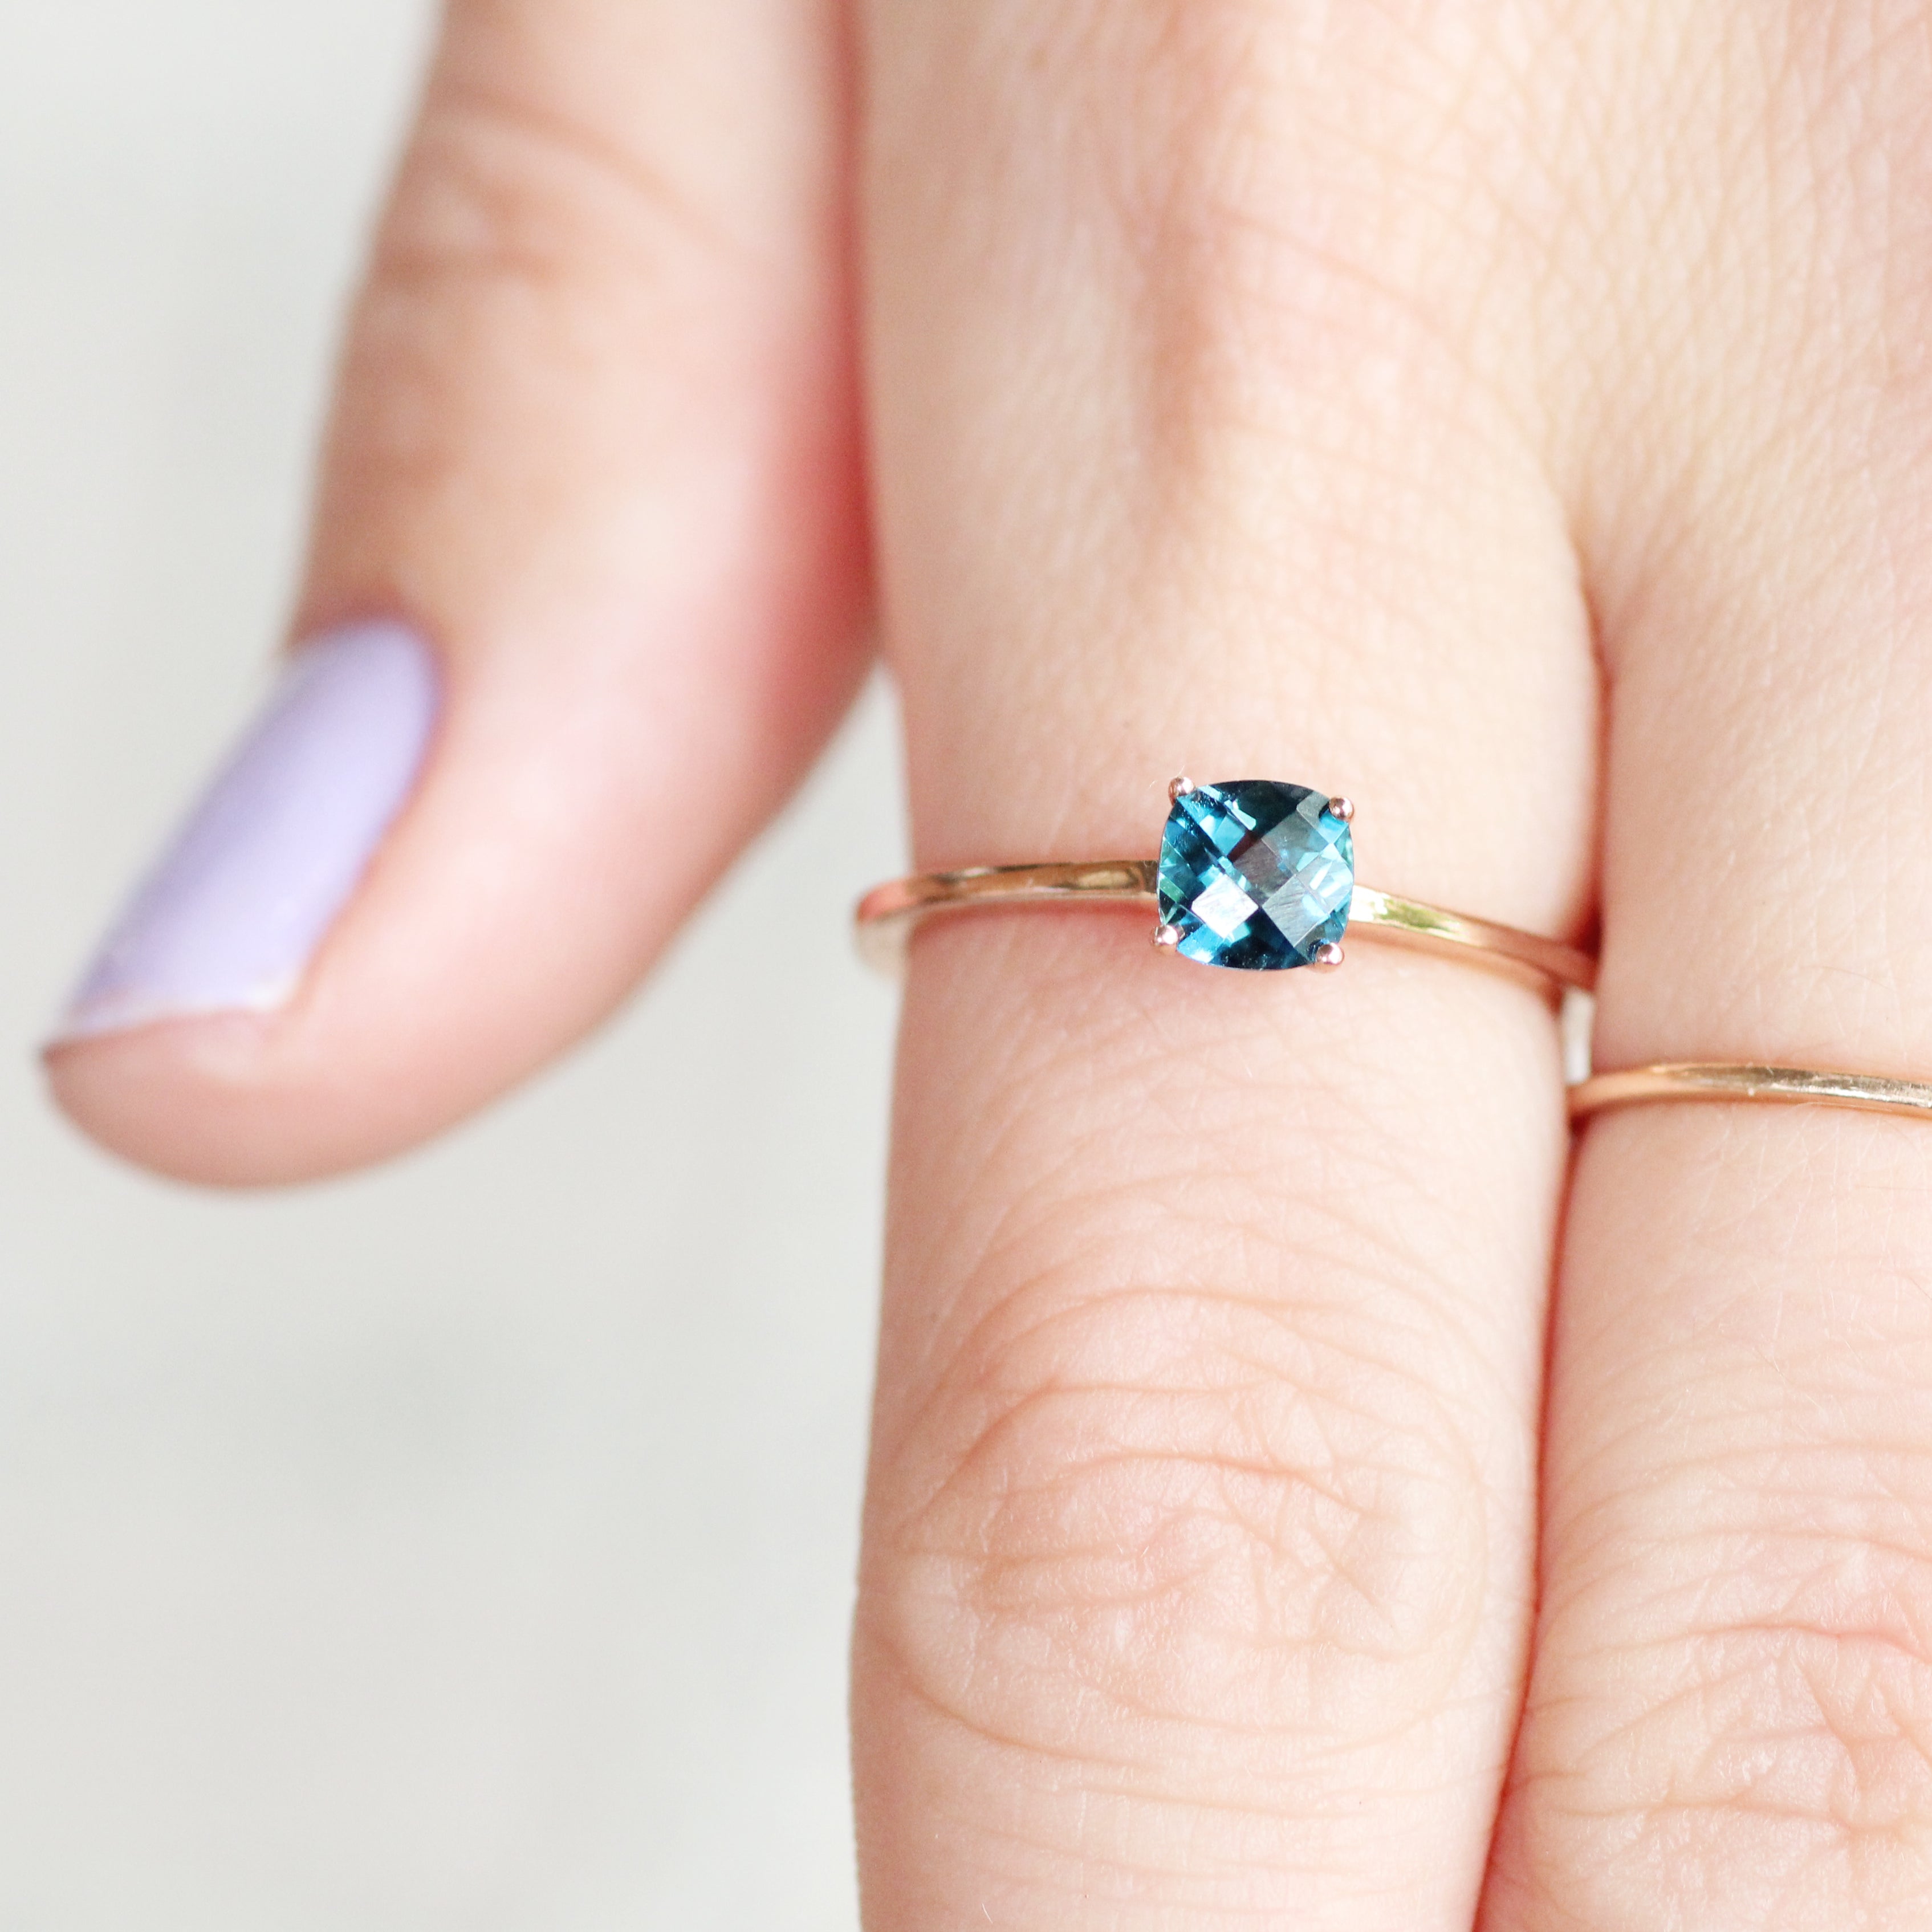 Cushion Cut London Blue Topaz Ring with Fancy Gallery and Diamond Halo in  18k white gold (GR-6112)